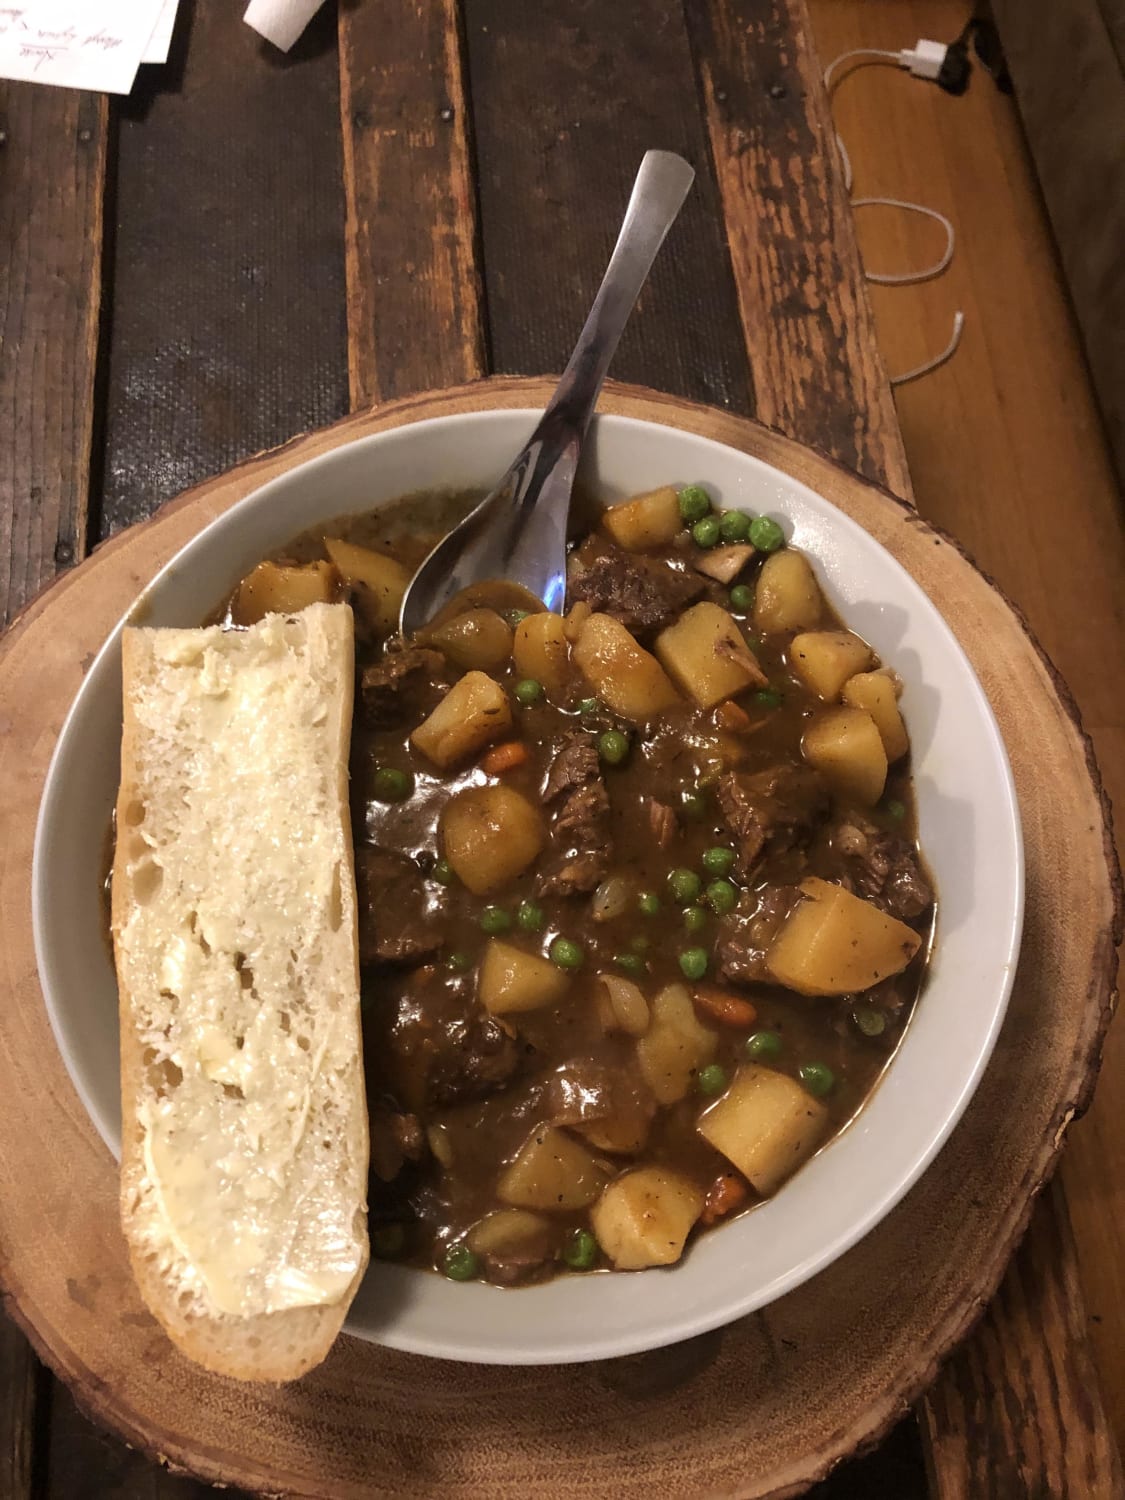 I also made All-American Beef Stew